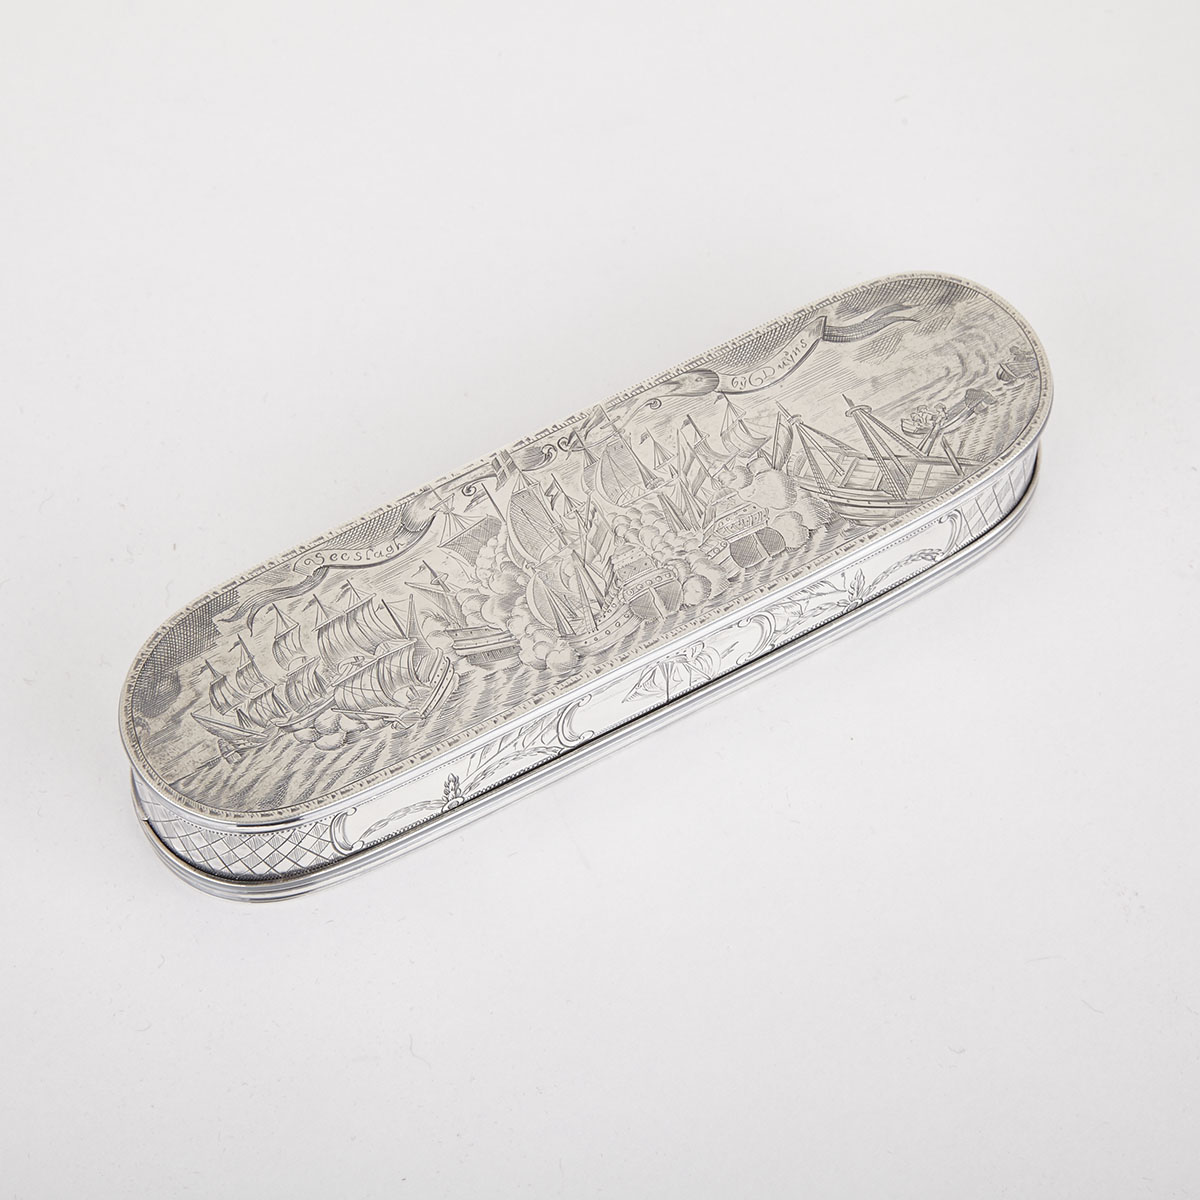 Dutch Silver Oval Tobacco Box, late 19th/early 20th century